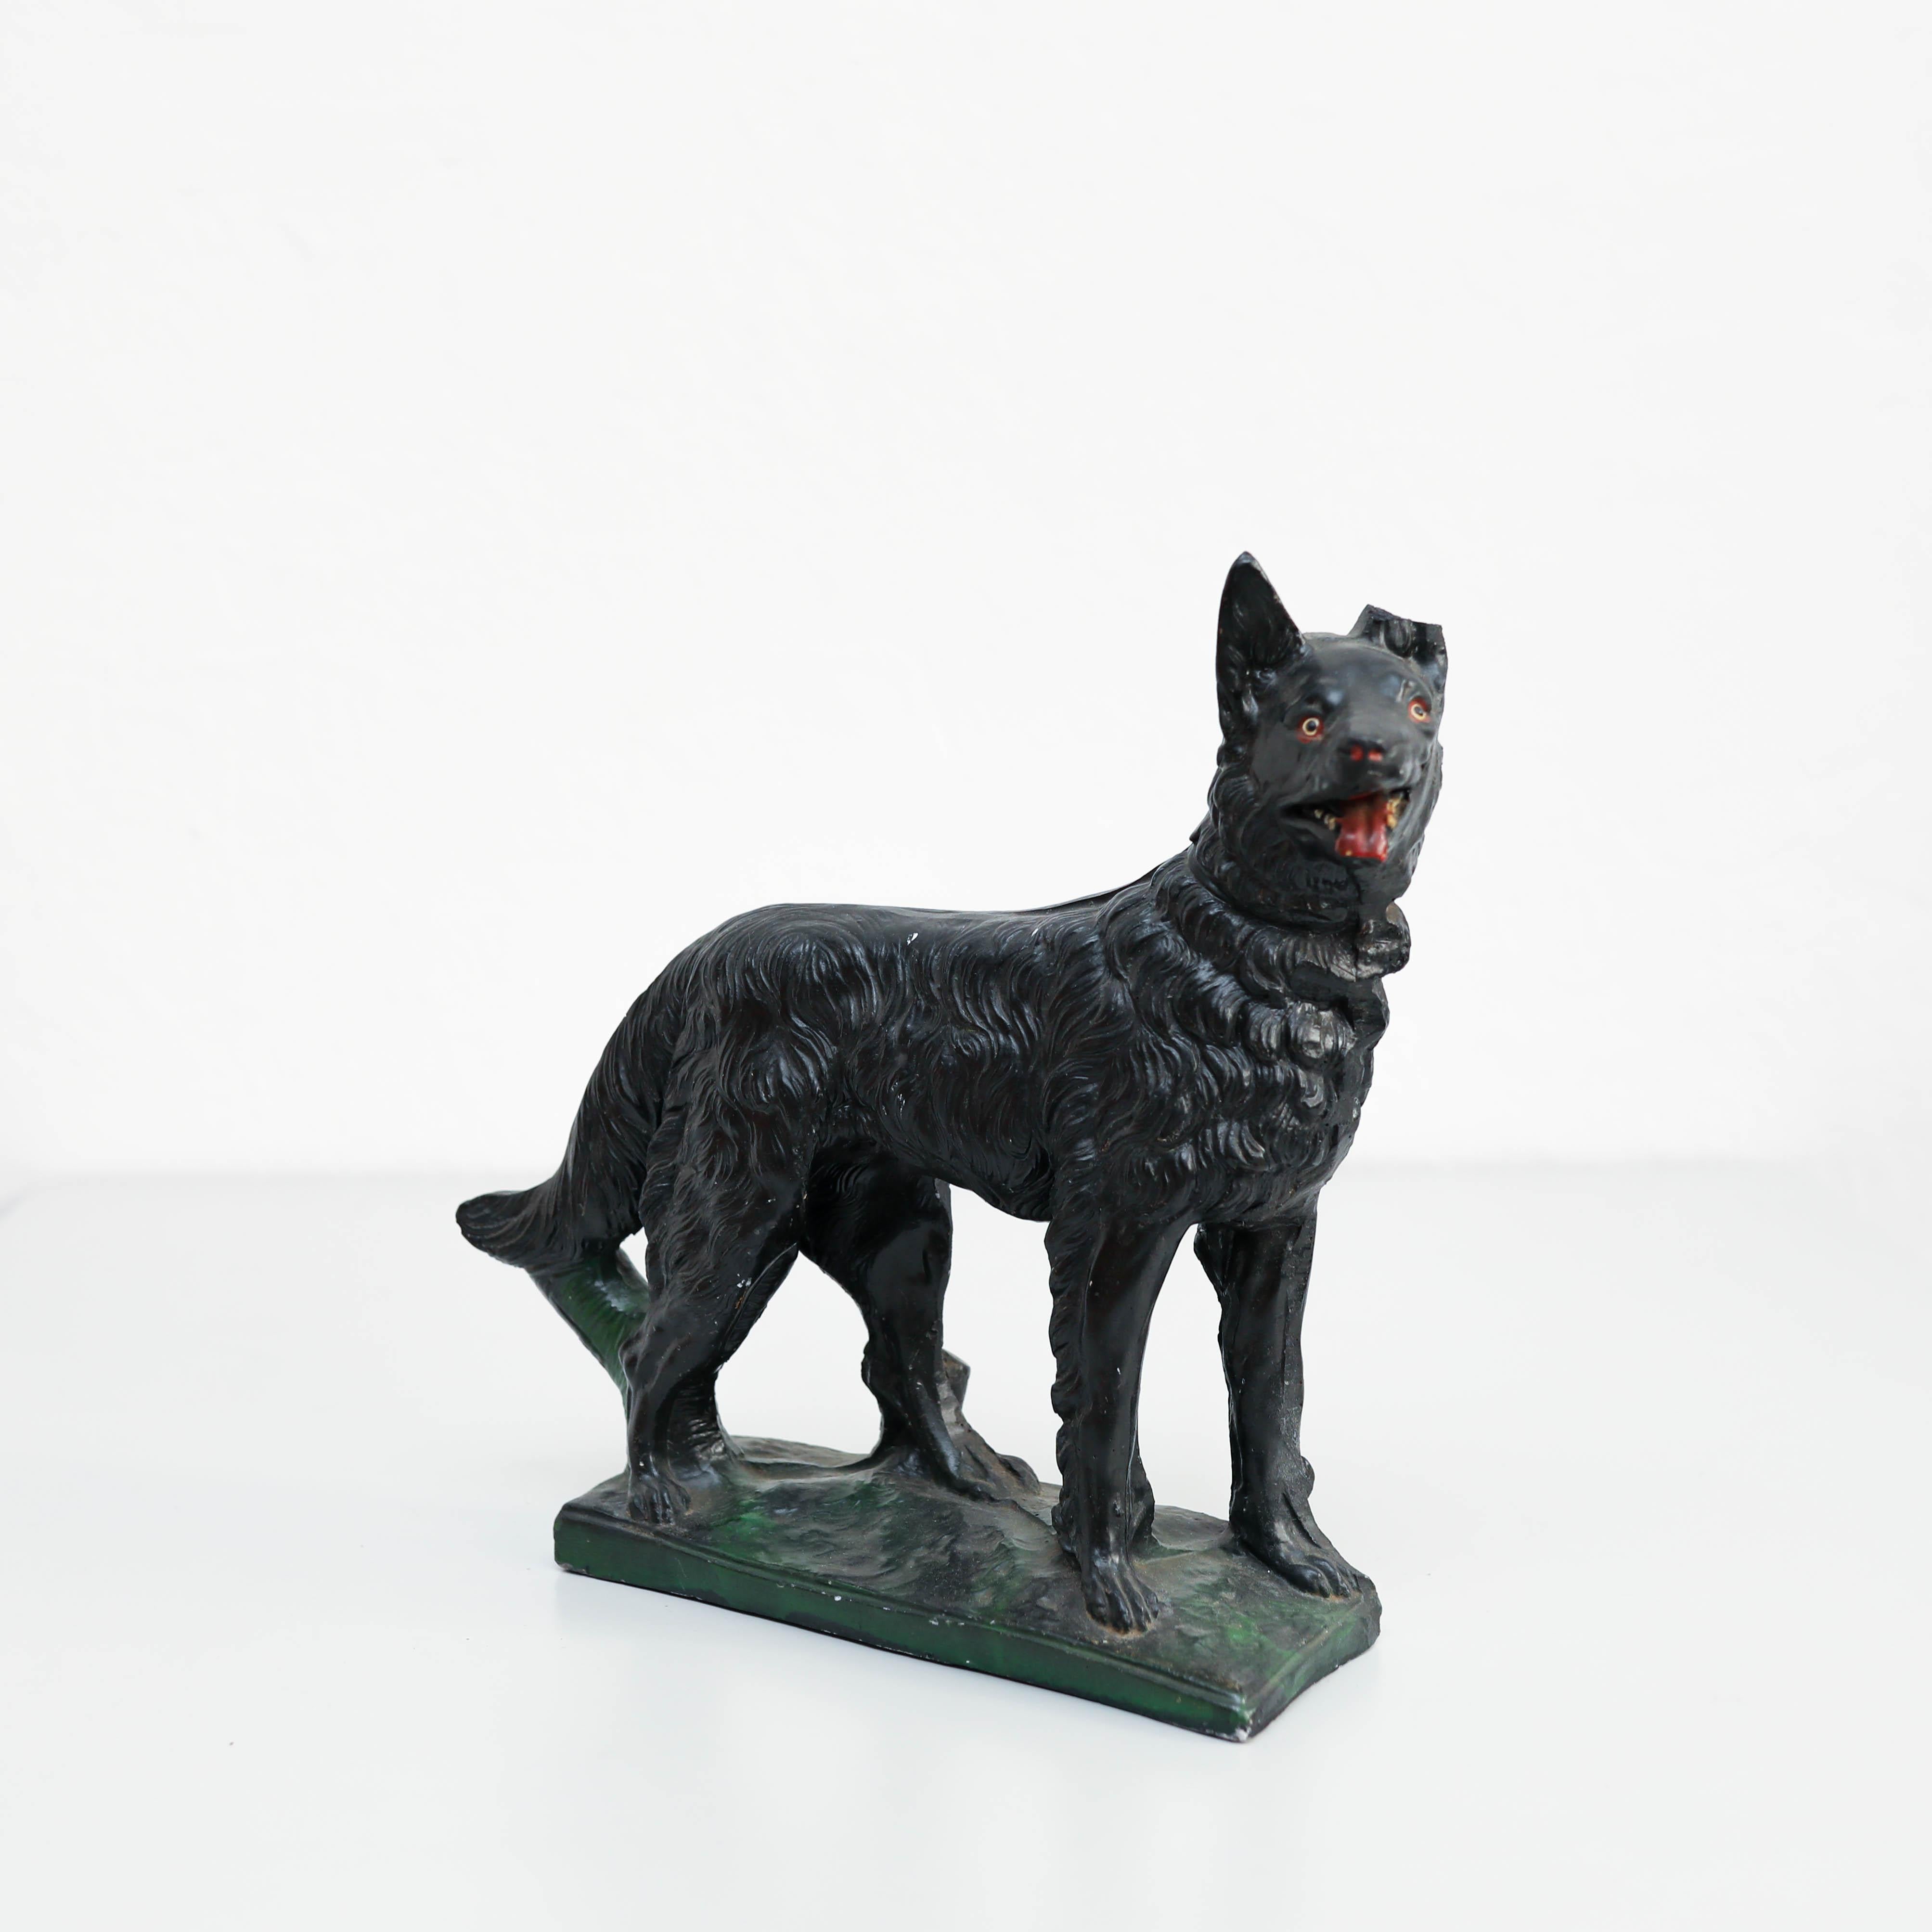 Embrace the charm of this vintage shepherd dog figure, a delightful addition to your home decor or collection. Made in Spain circa 1980, this rustic canine statue exudes character and warmth, making it an endearing piece to display or gift to a dog